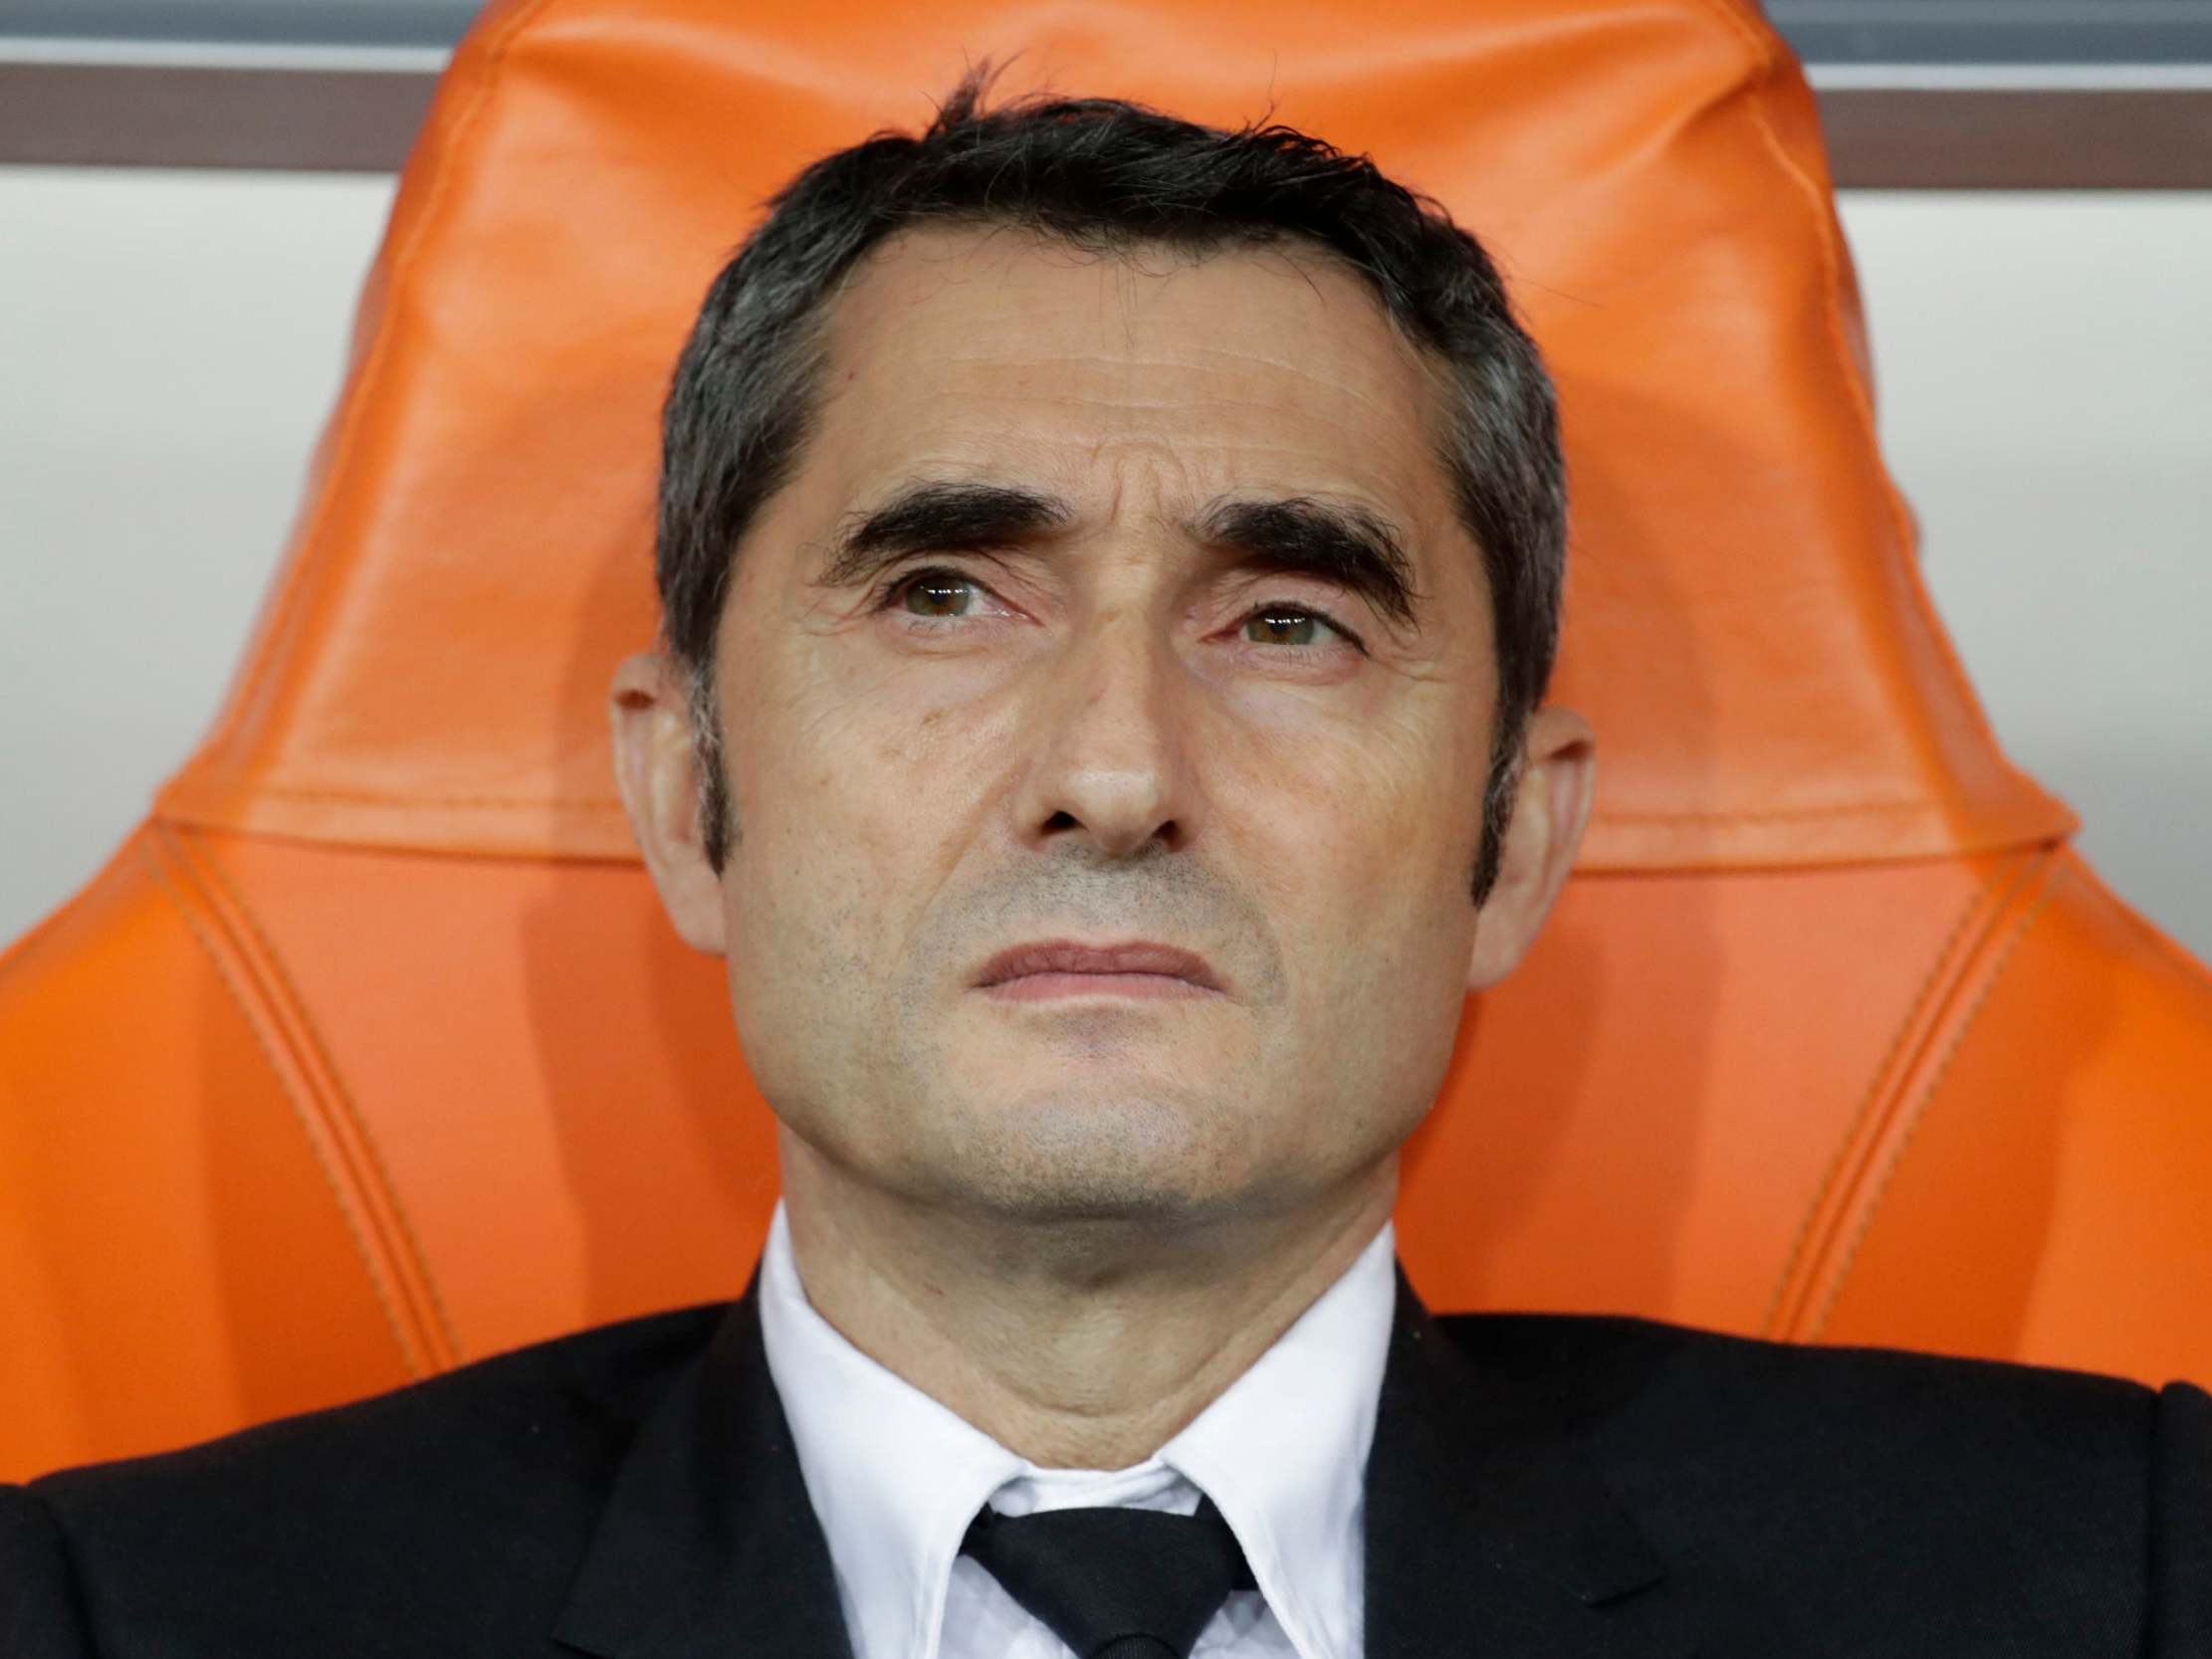 Ernesto Valverde's time appears to be up at Barcelona